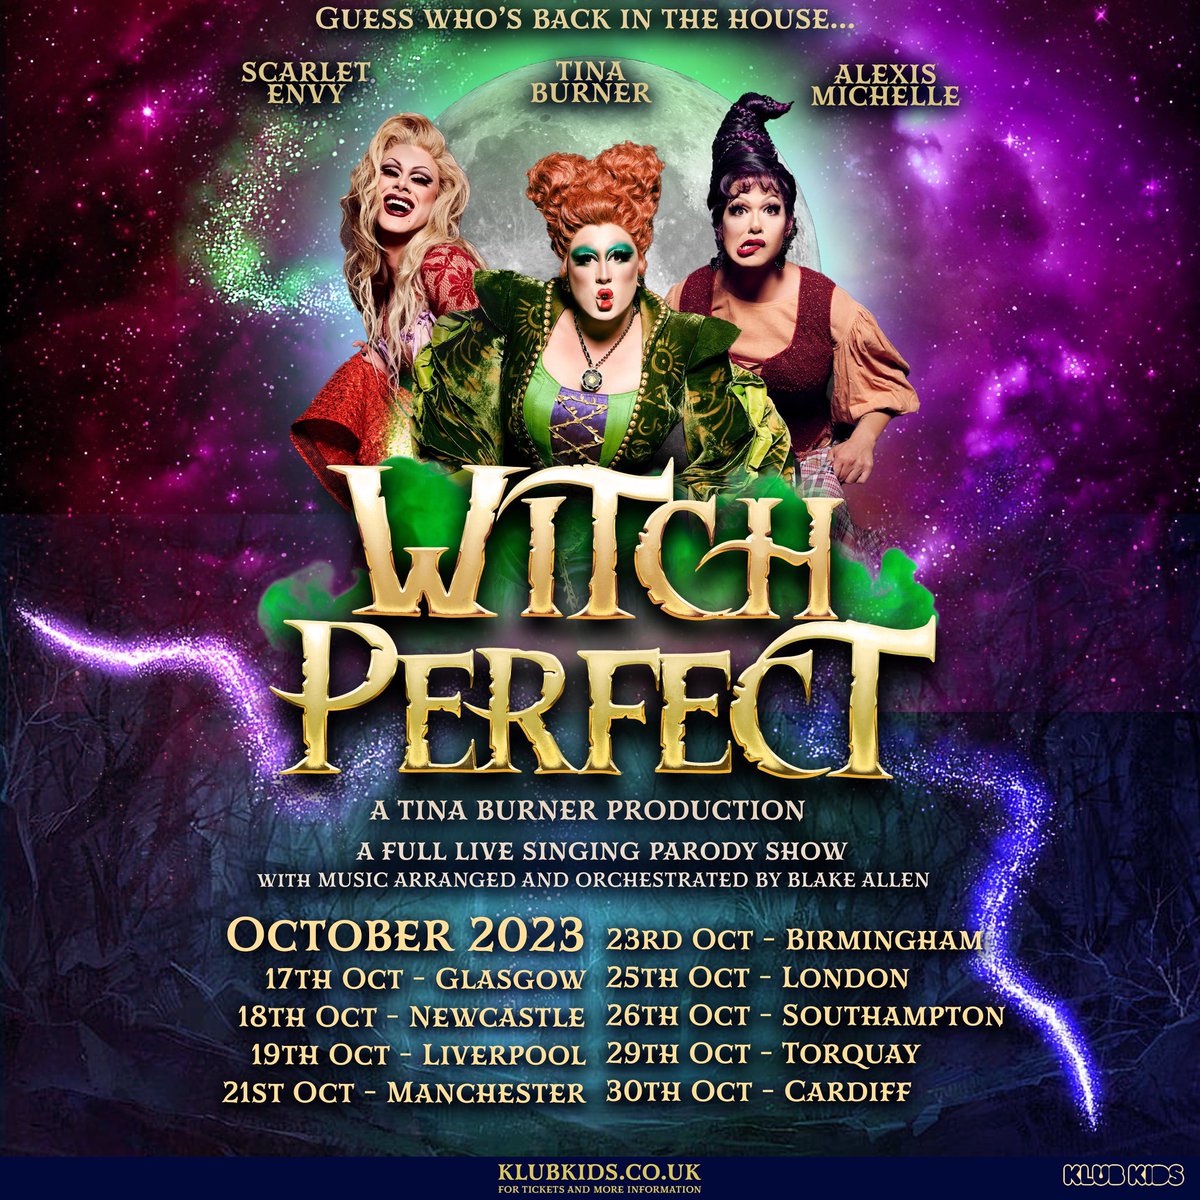 Tickets are LIVE for our UK leg of WITCH PERFECT with @AlexisLives @ScarletEnvyNYC @blakeallennyc tinaburner.com/wp.html